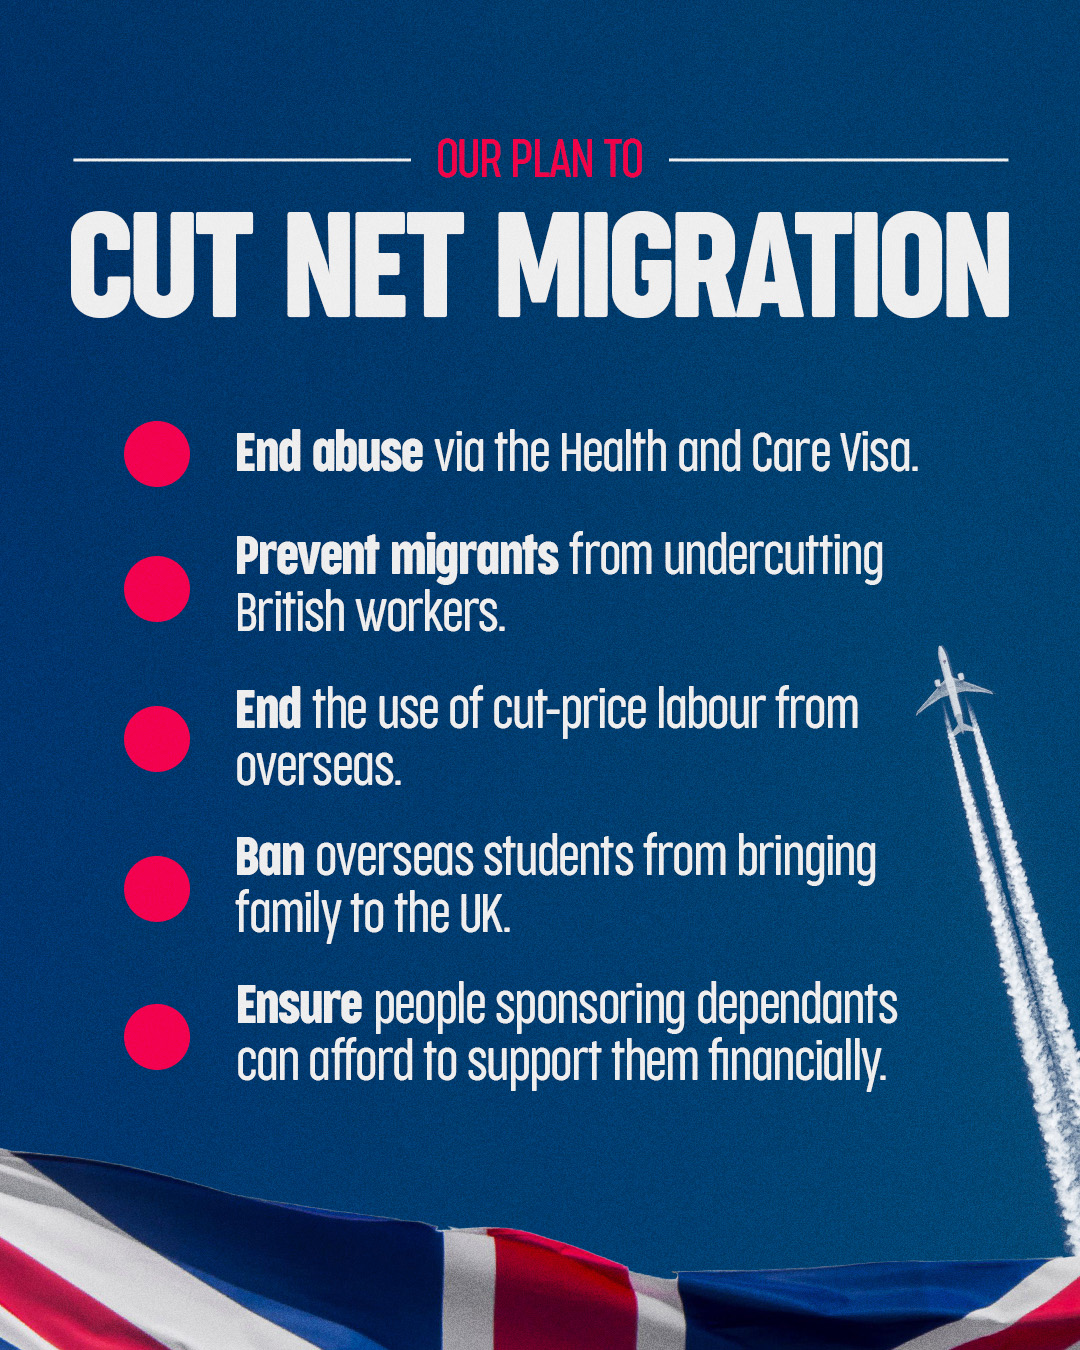 Our plan to deliver the biggest ever cut in net migration